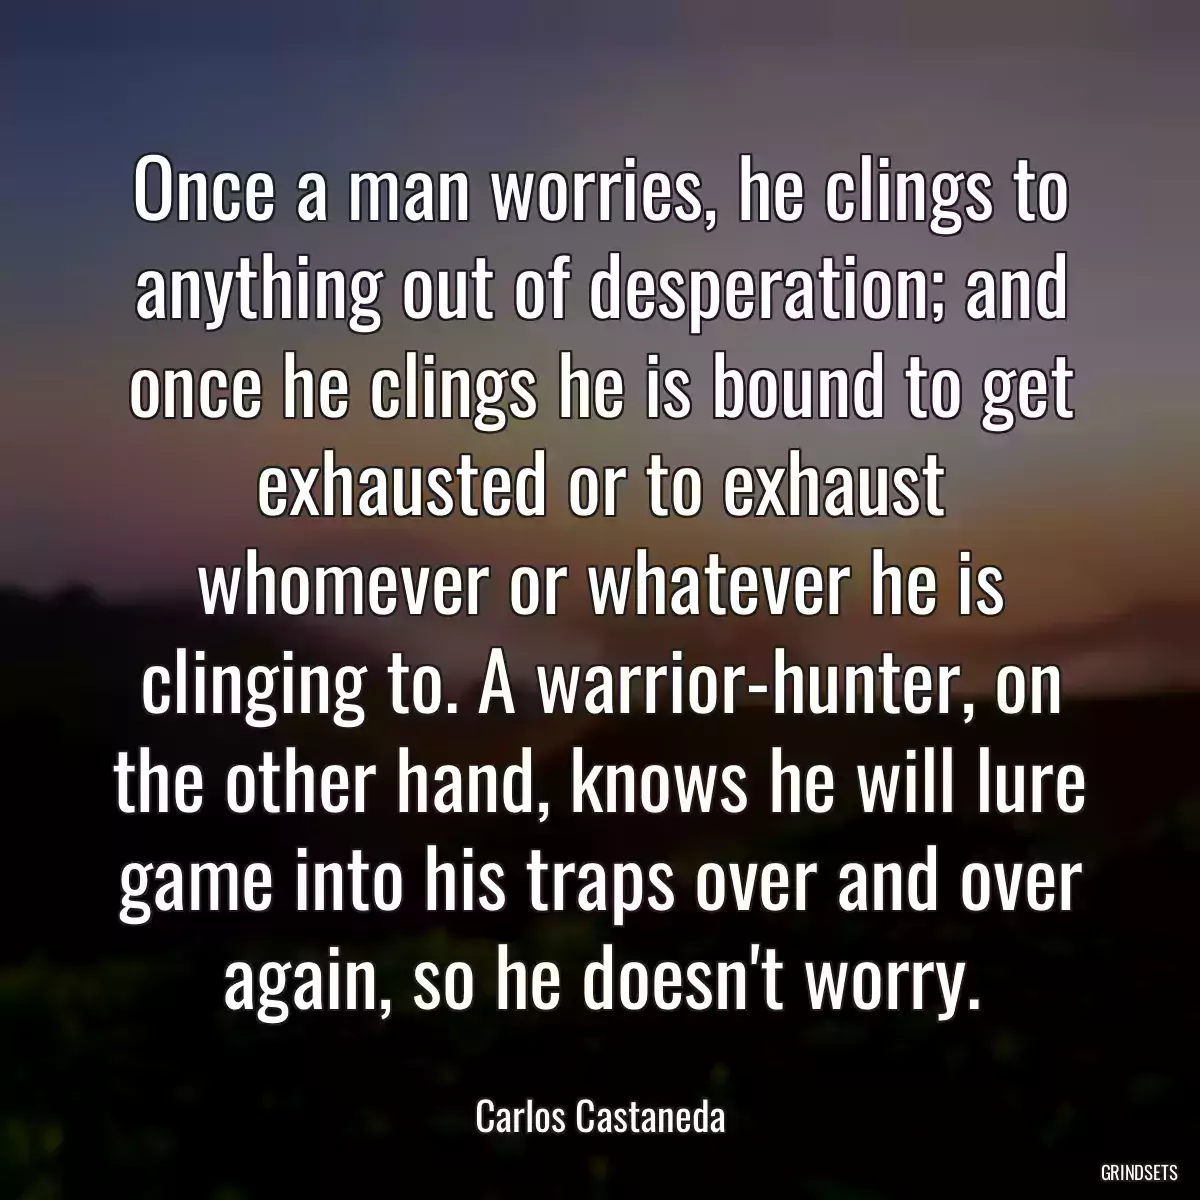 Once a man worries, he clings to anything out of desperation; and once he clings he is bound to get exhausted or to exhaust whomever or whatever he is clinging to. A warrior-hunter, on the other hand, knows he will lure game into his traps over and over again, so he doesn\'t worry.